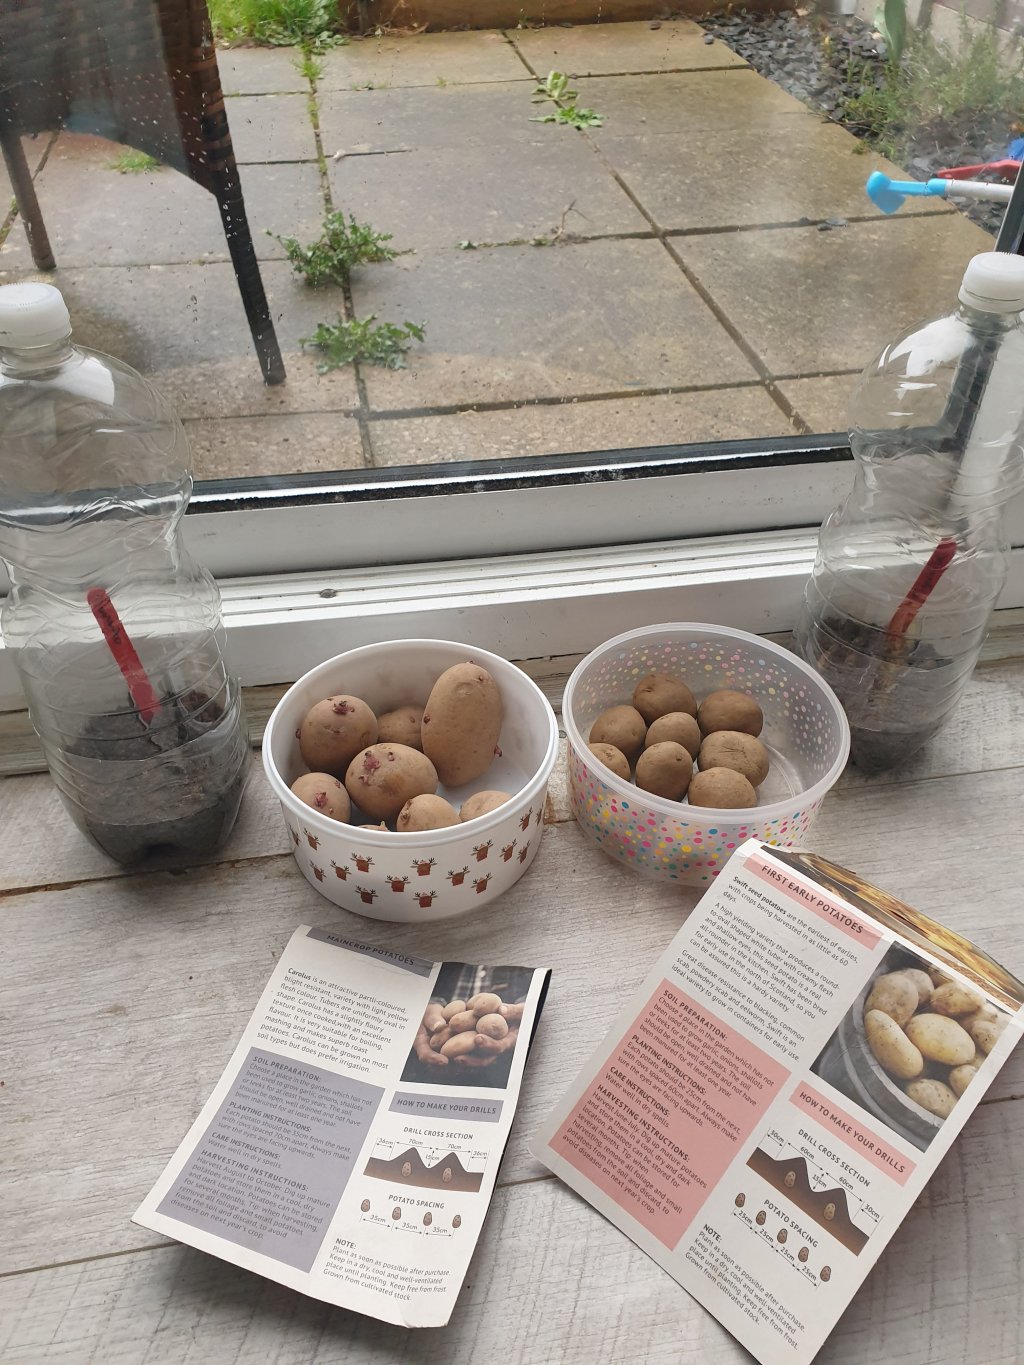 Chitting potatoes and sowing more tomatoes 🍅🌱